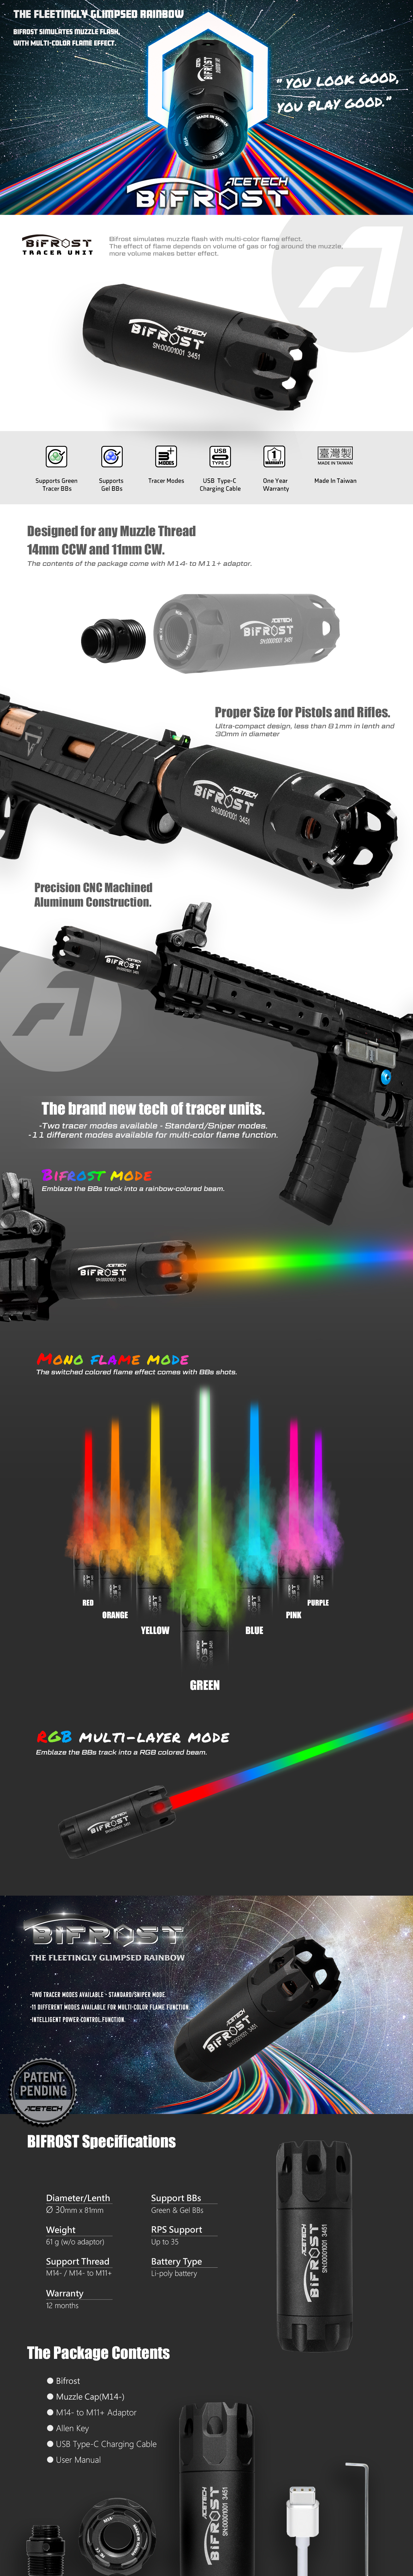 Acetech Bifrost - RAINBOW airsoft tracer - Early Look 